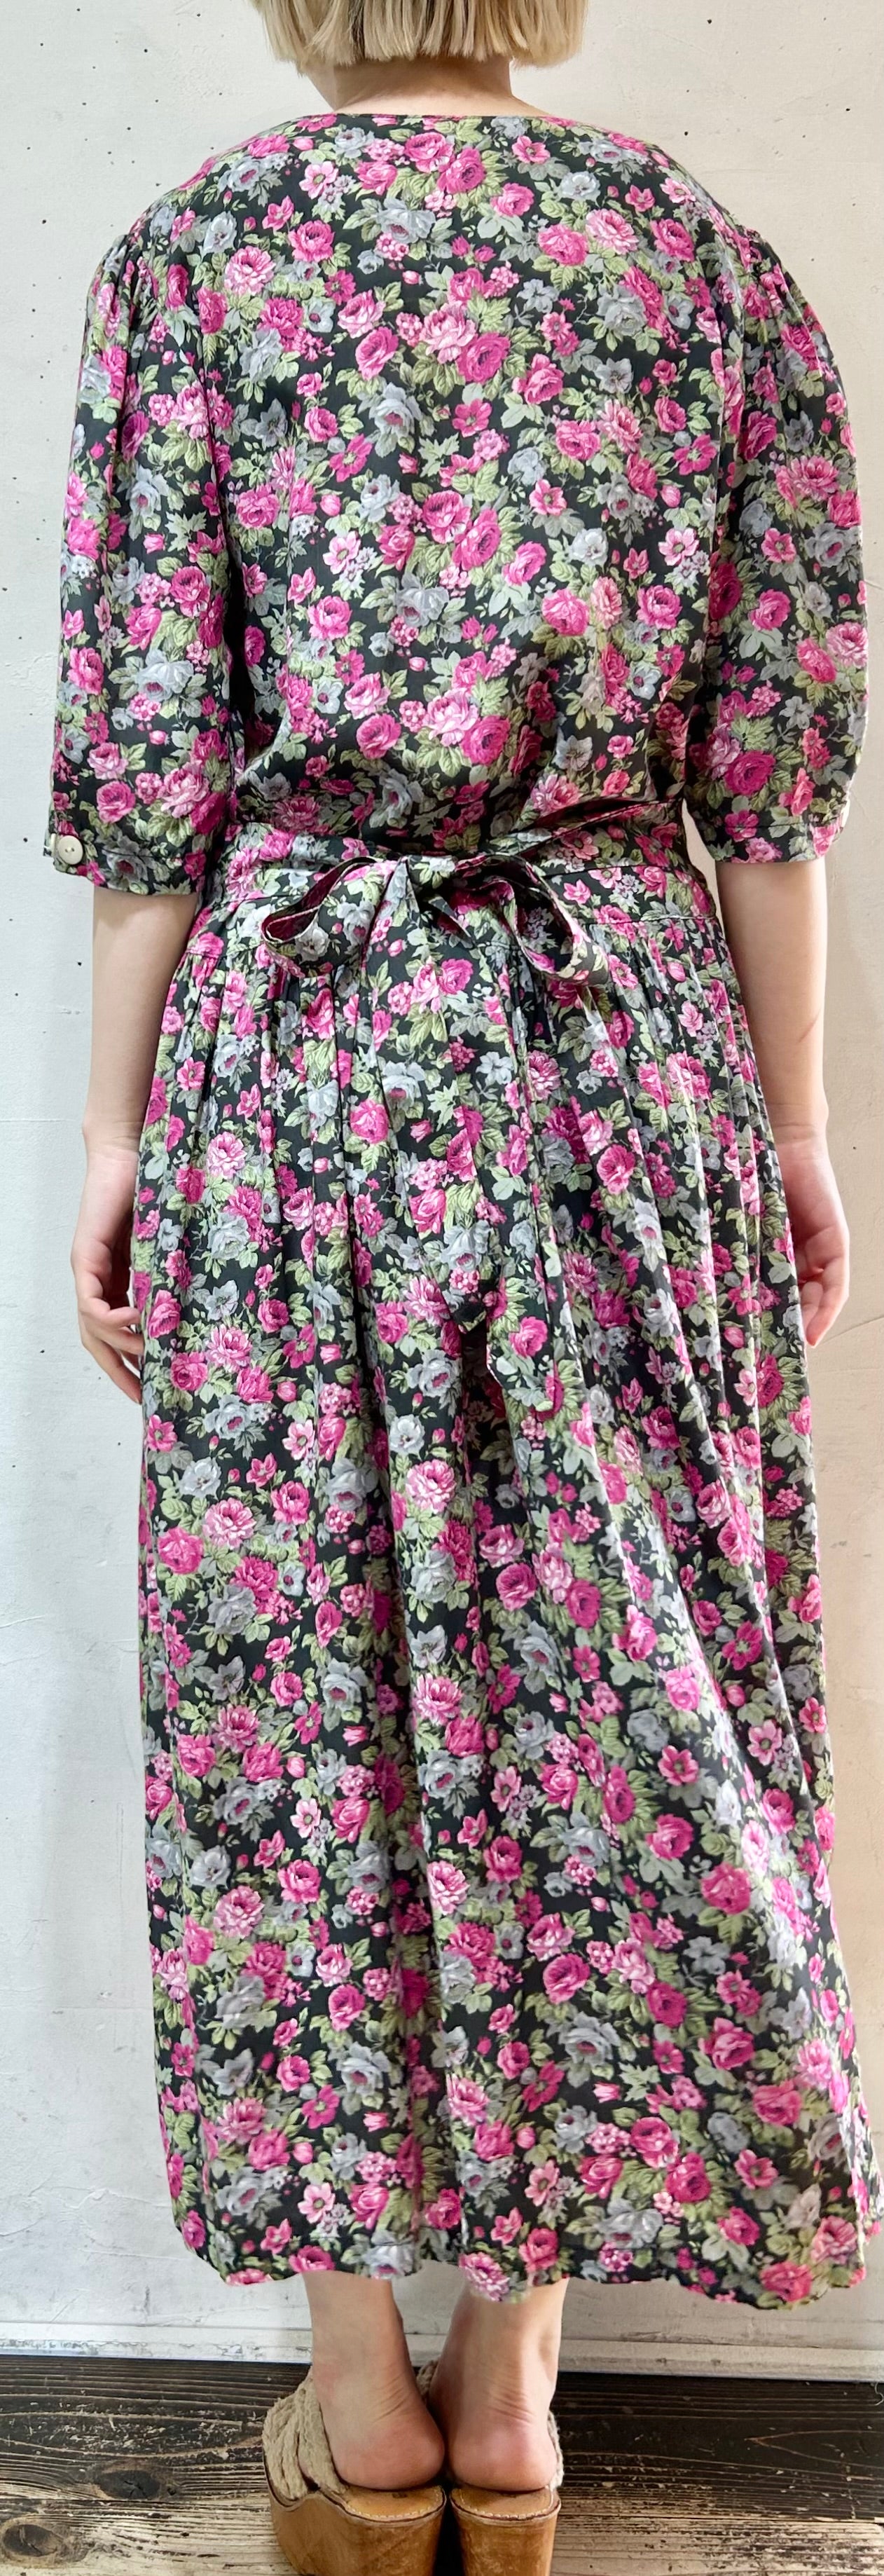 Vintage Viscose Dress MADE IN ITALY [E26435]